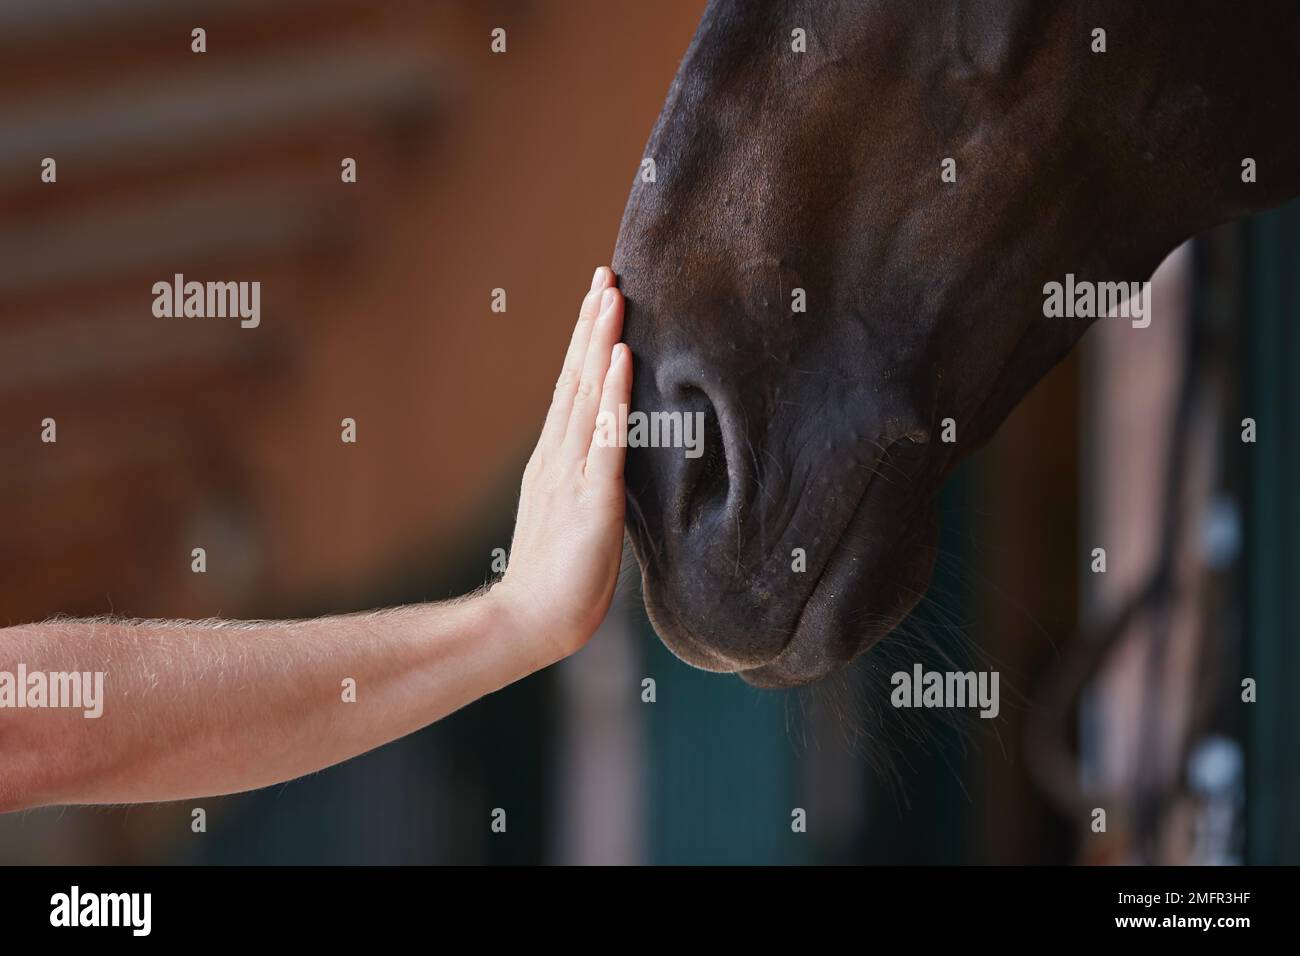 Friendship between man and his horse. Human hand stroking horse head in stable. Stock Photo